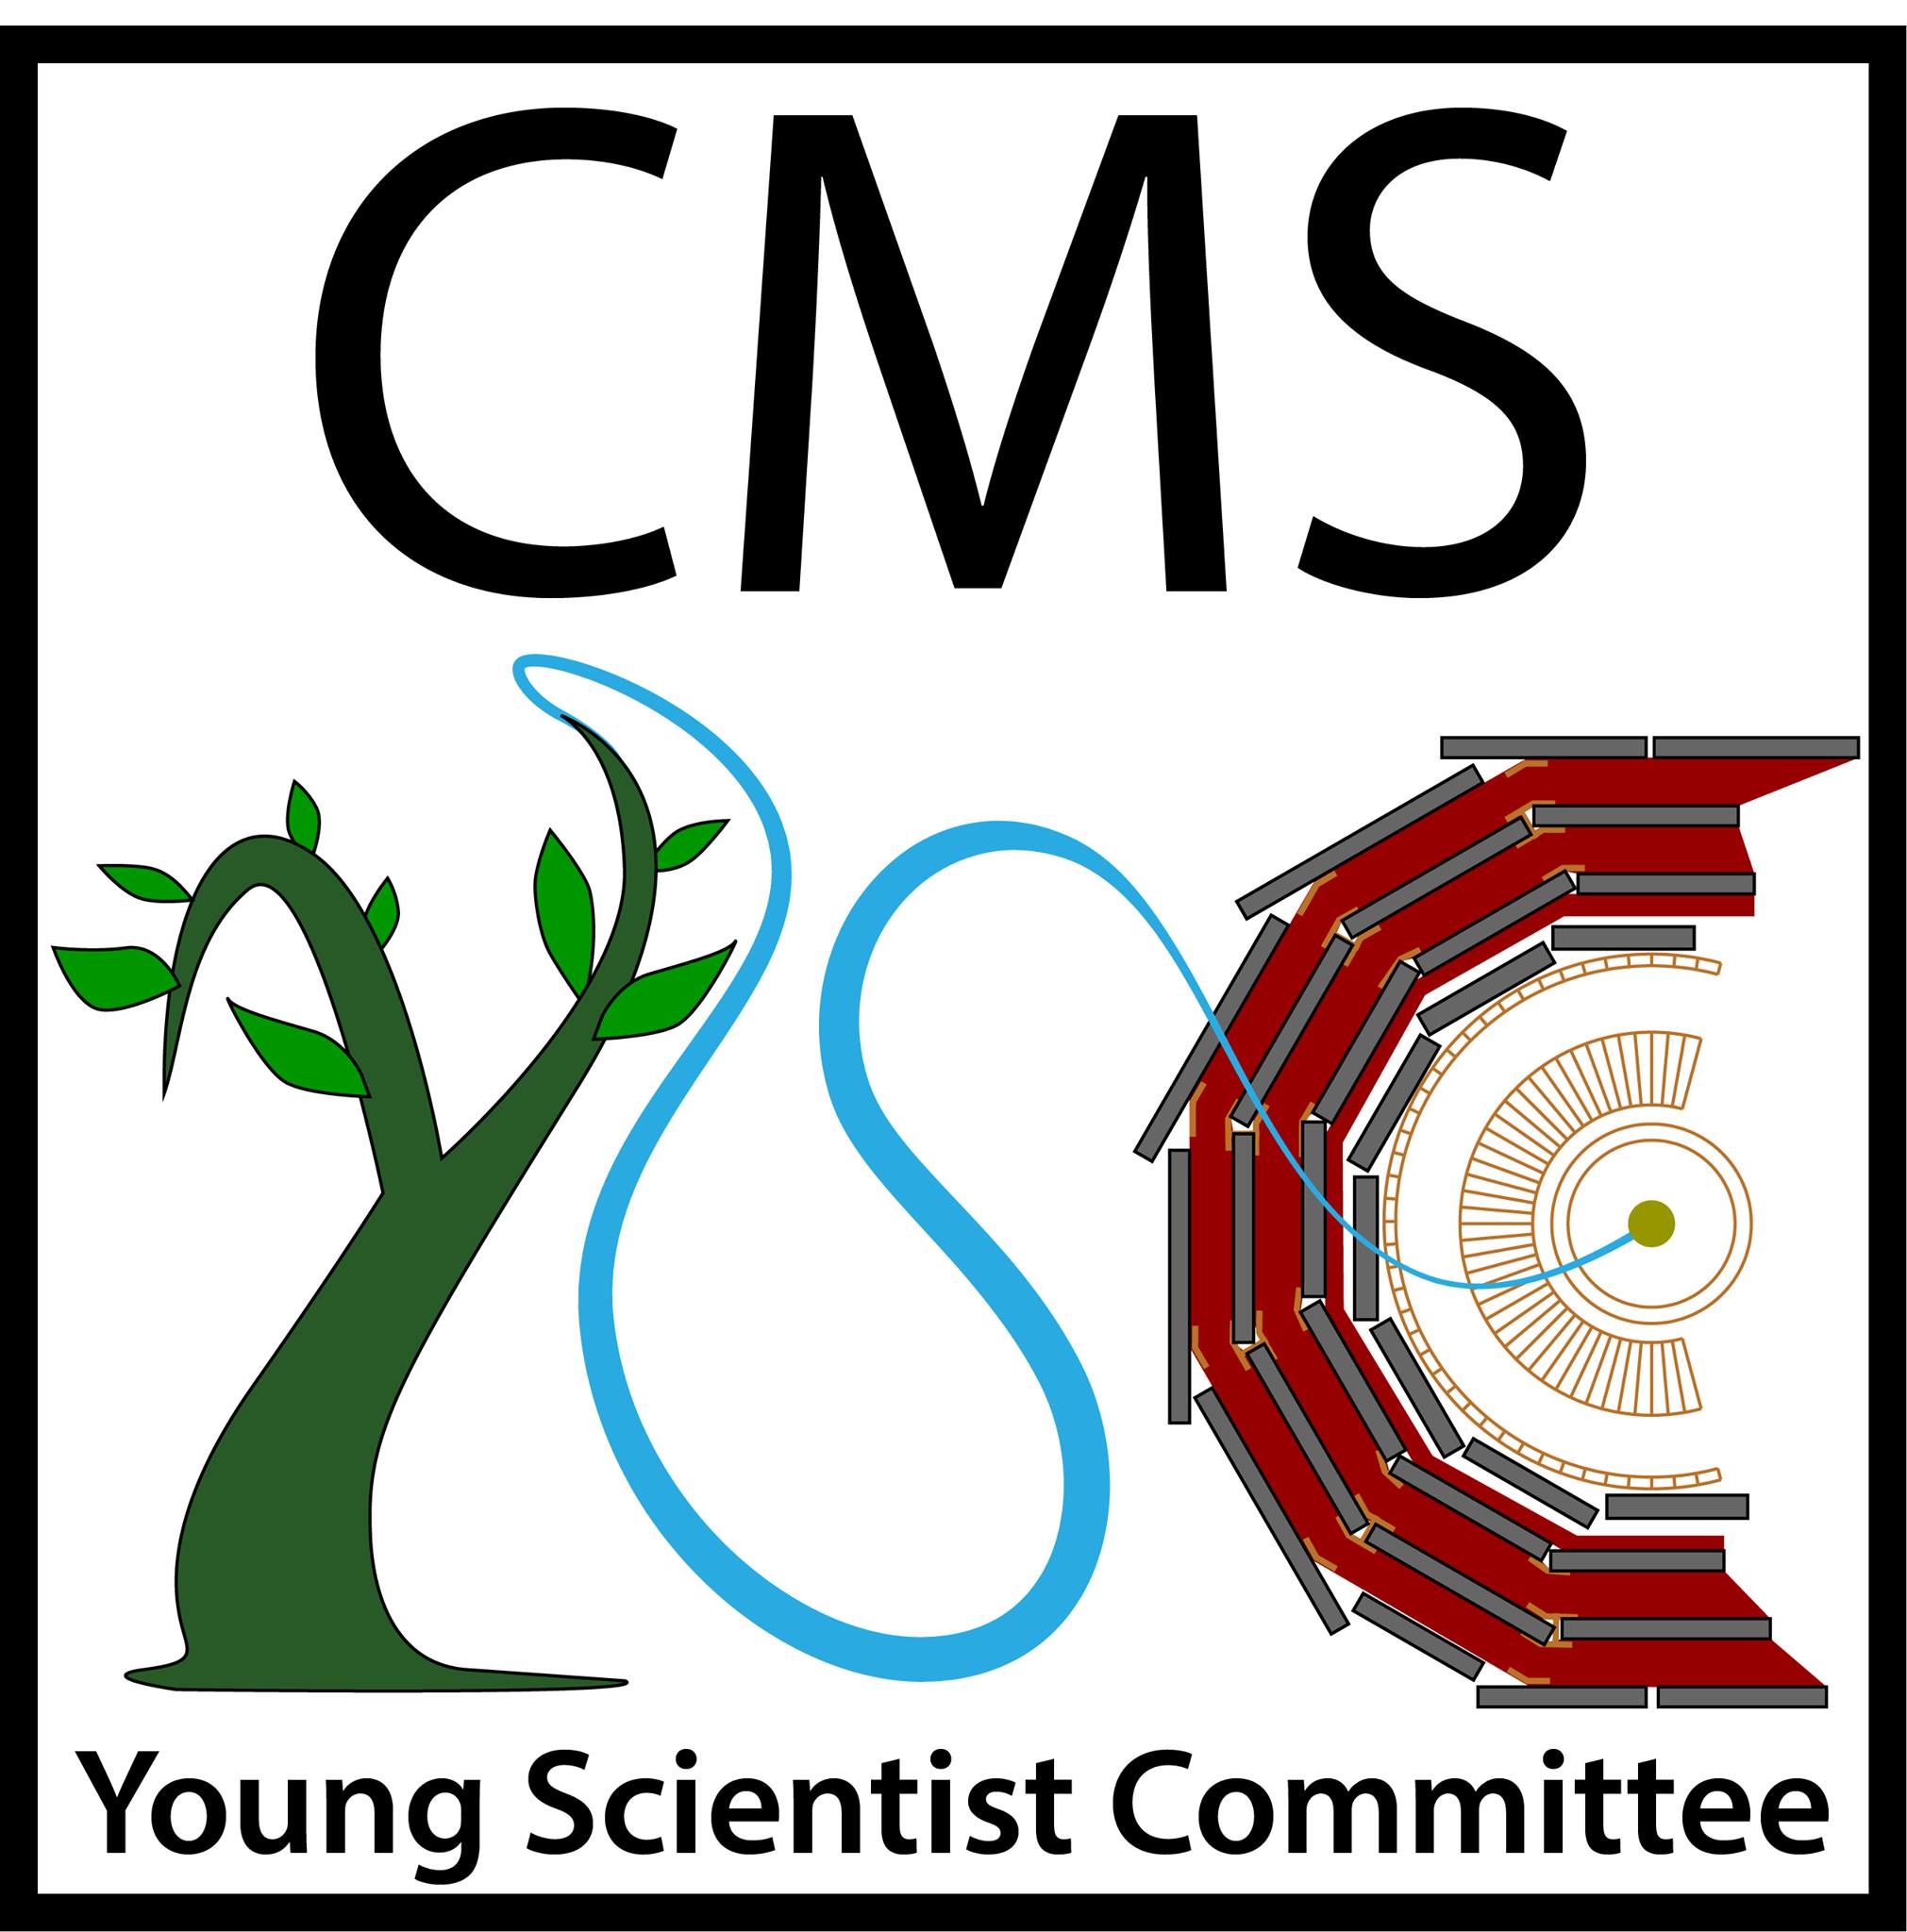 The logo of the CMS Young Scientist Committee. We had a fun competition where members submitted their logo designs and voted for the winner. The winning design was by postdoctoral researcher Ansar Iqbal. 